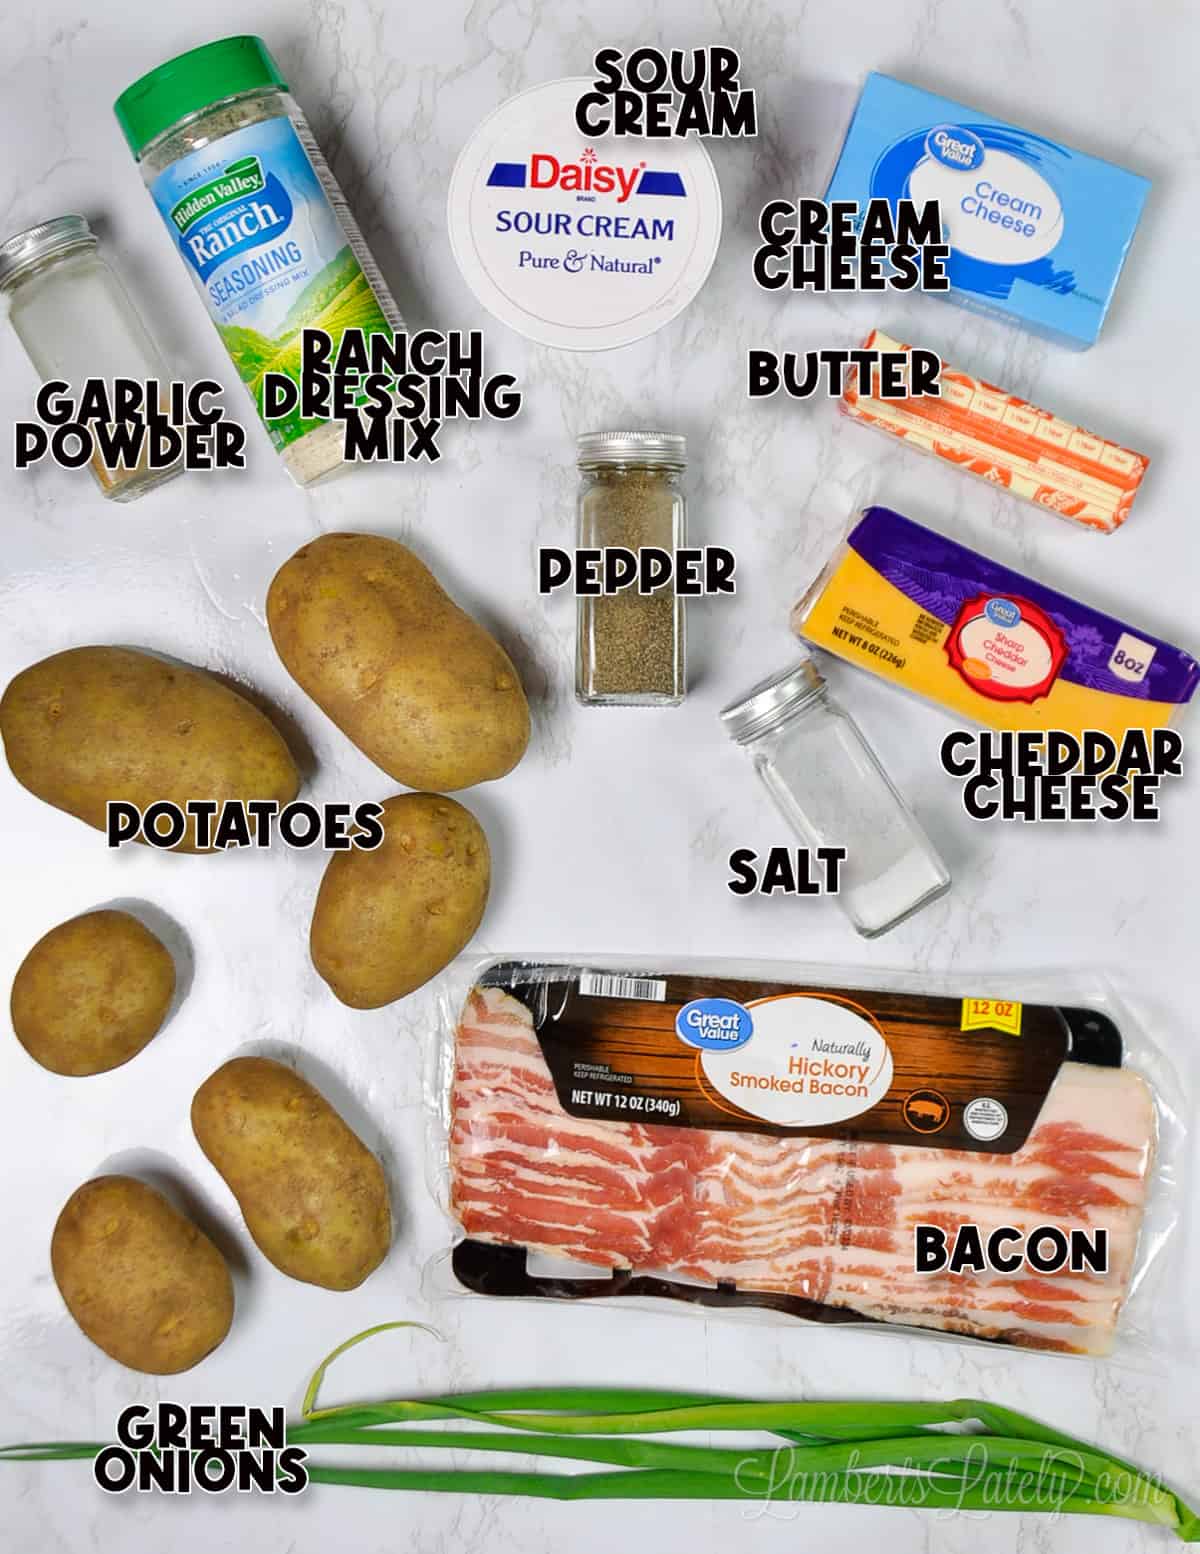 ingredients for twice baked mashed potatoes.